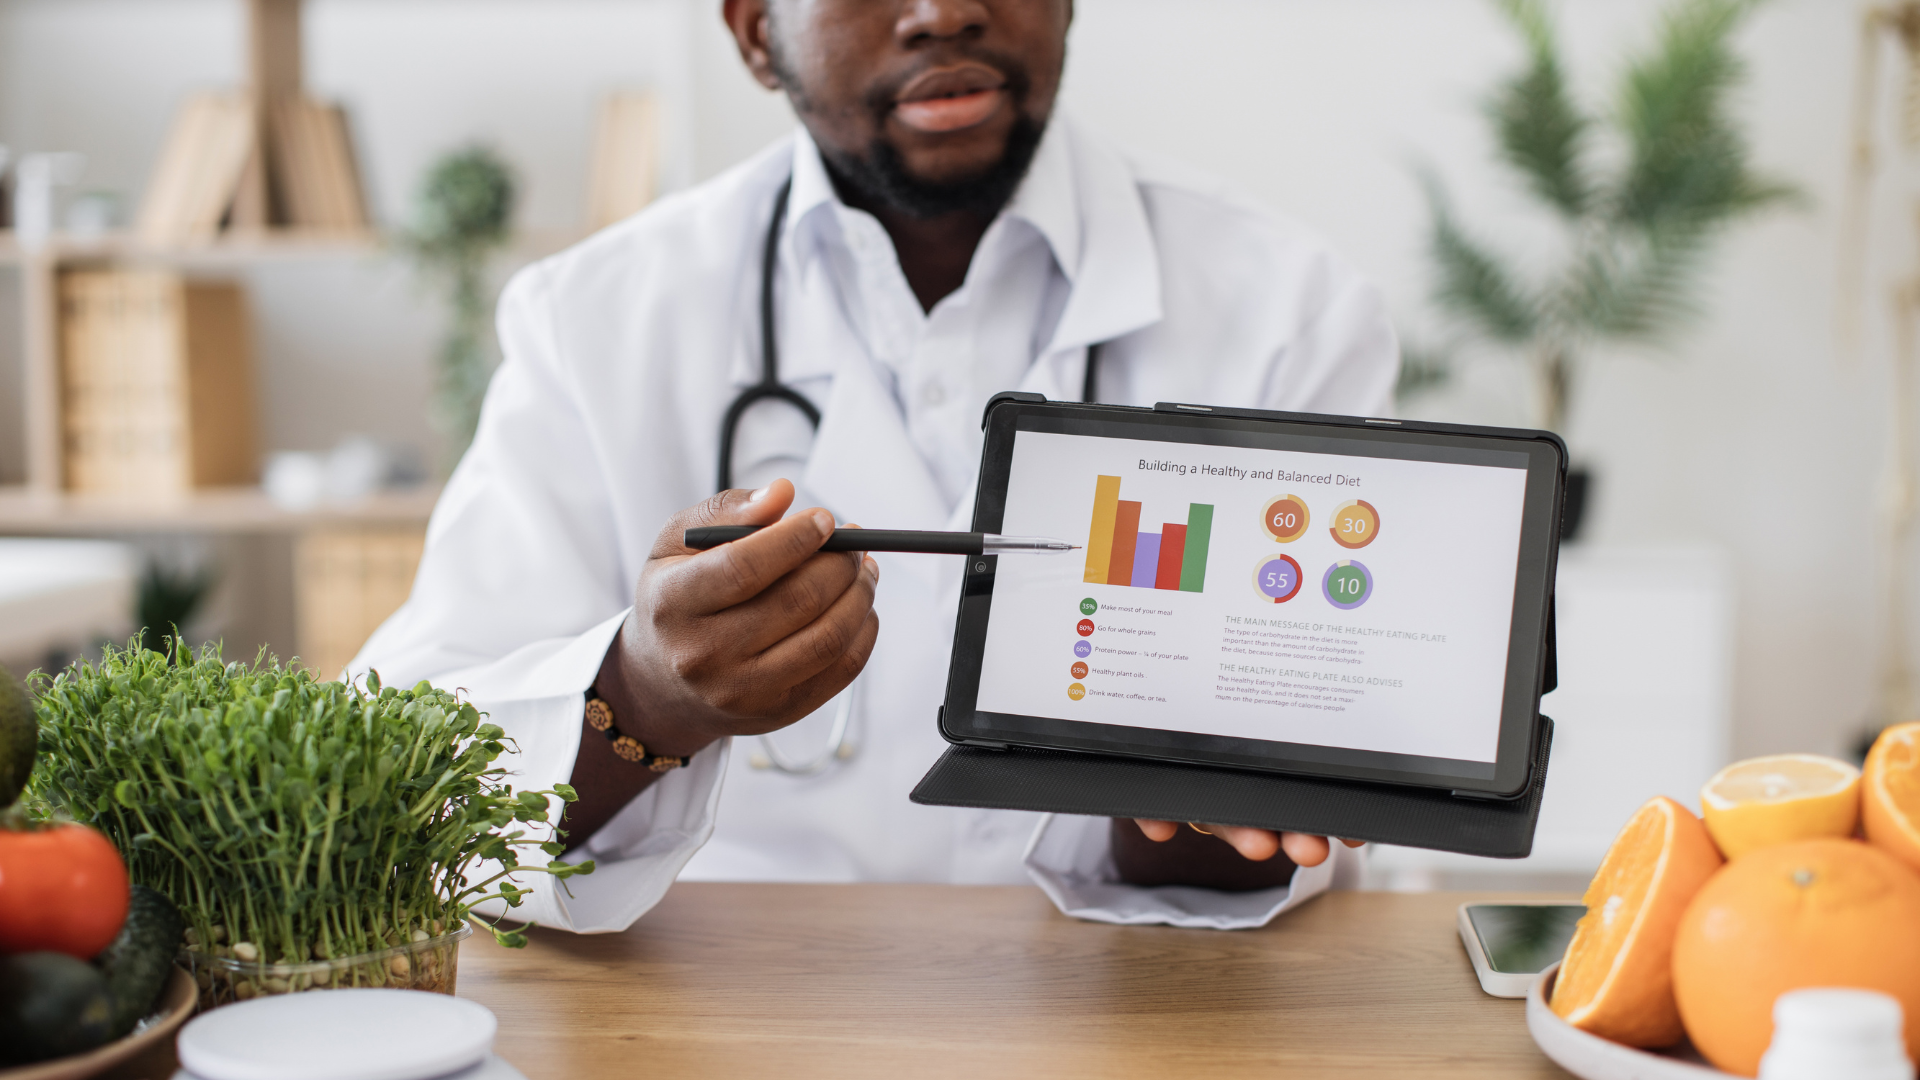 7 KPIs you need for measuring Healthcare Marketing Success